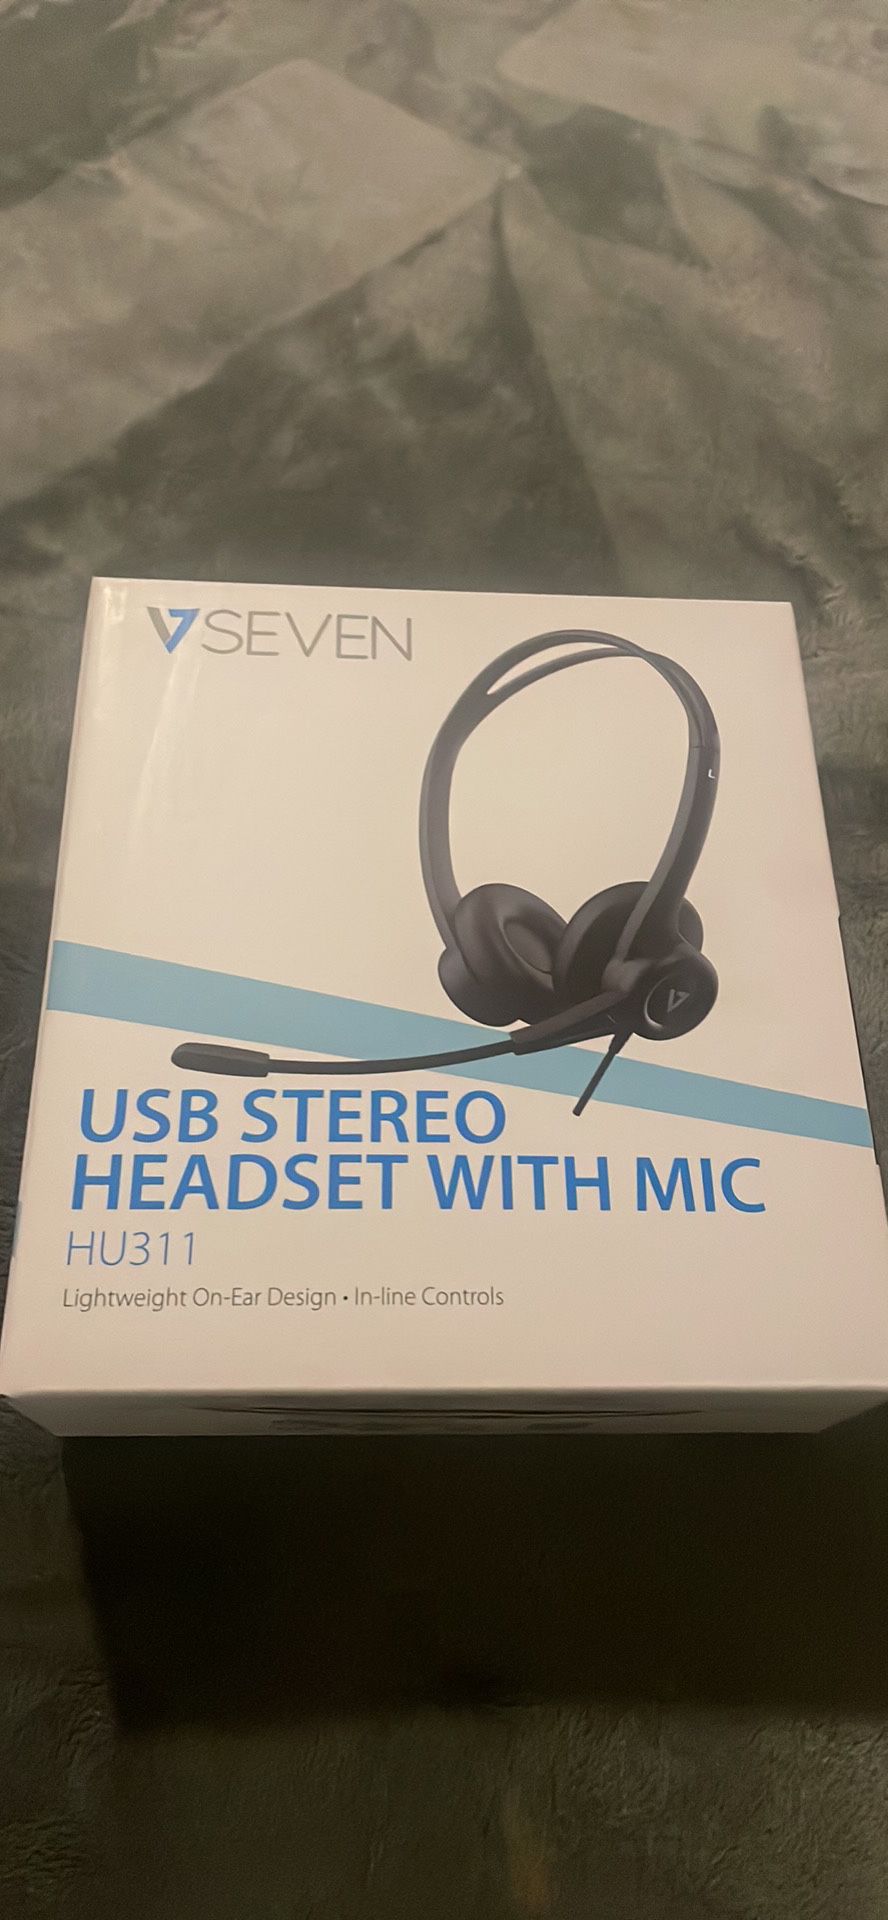 USB Stereo Headset With mic